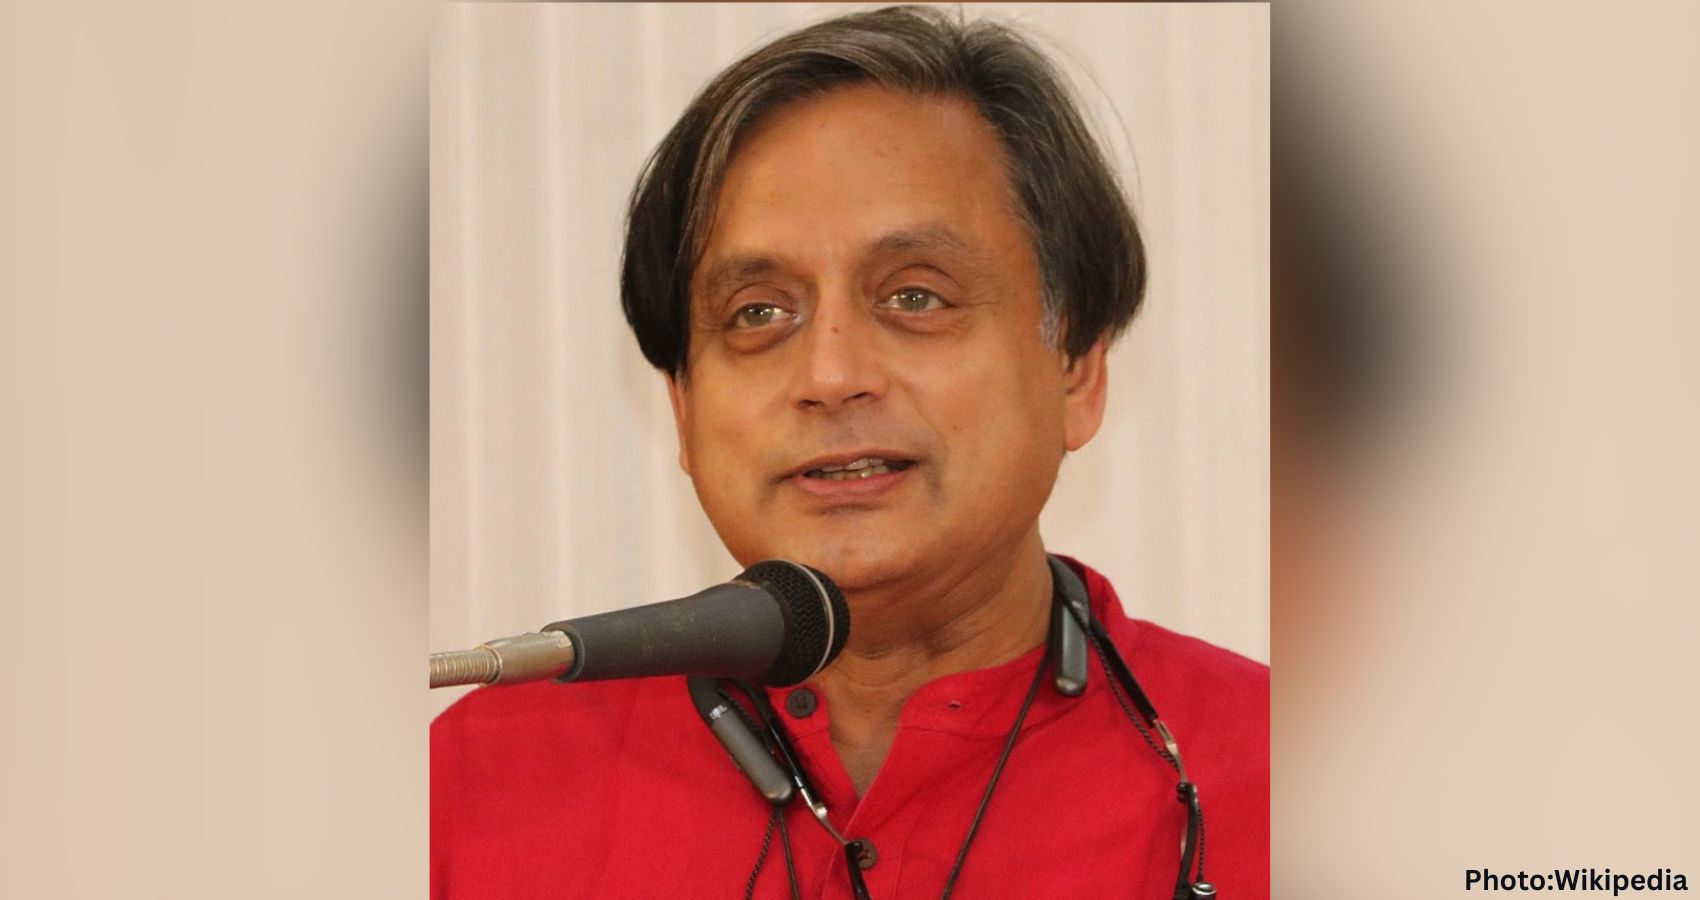 Feature and Cover Shashi Tharoor Asserts INDIA Bloc’s Role as Strong Opposition Amid Modi’s Coalition Government Formation